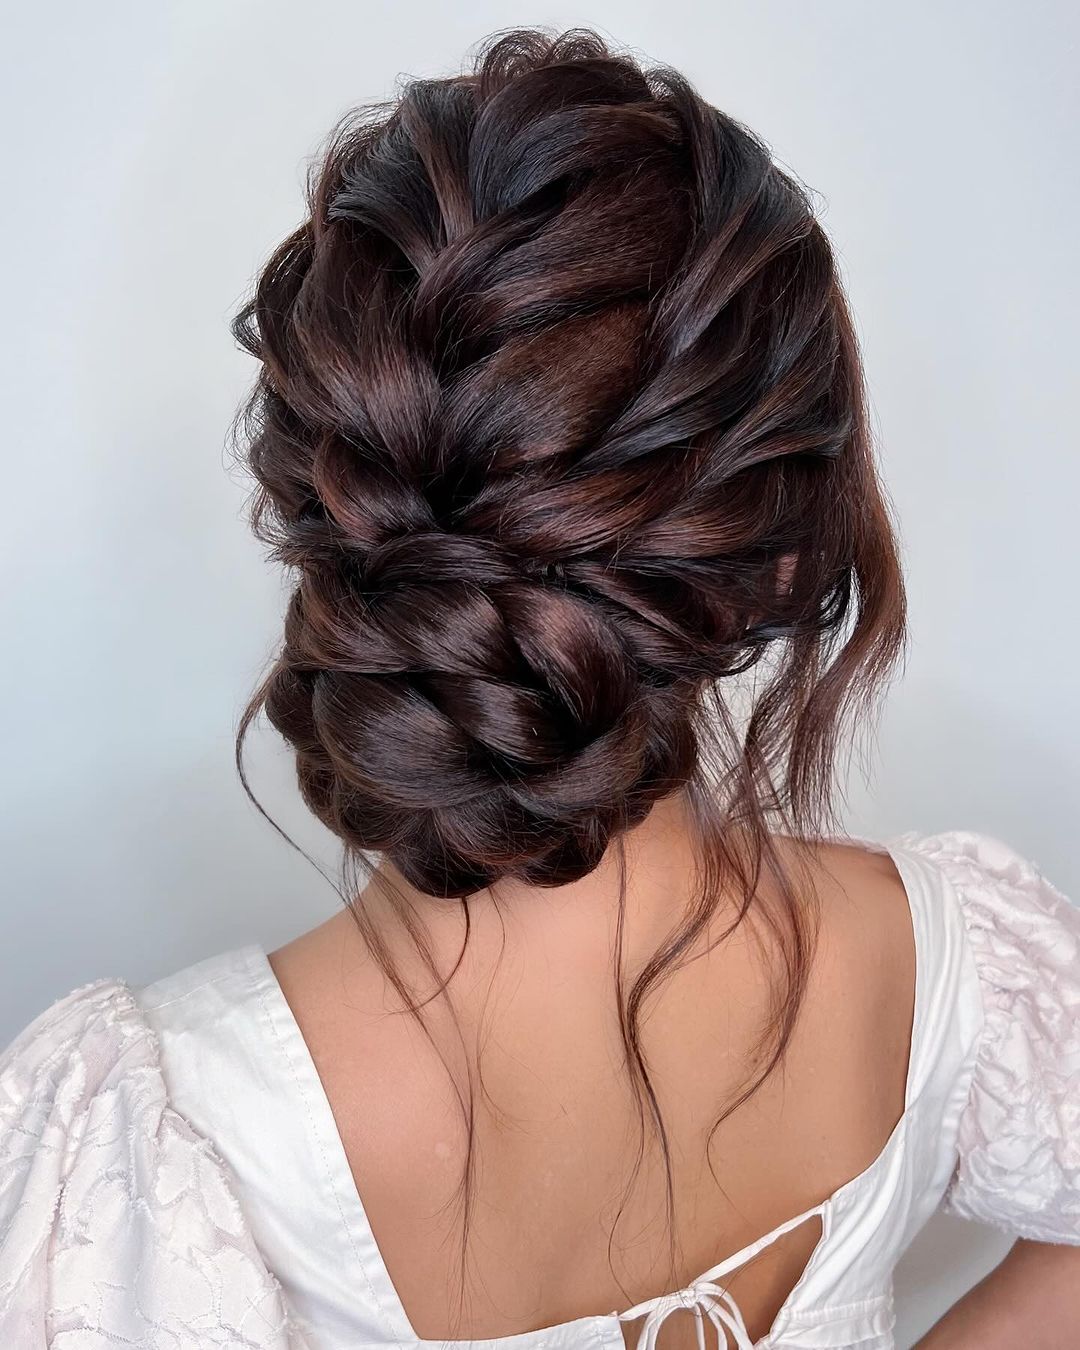 braided low updo wedding hairstyle